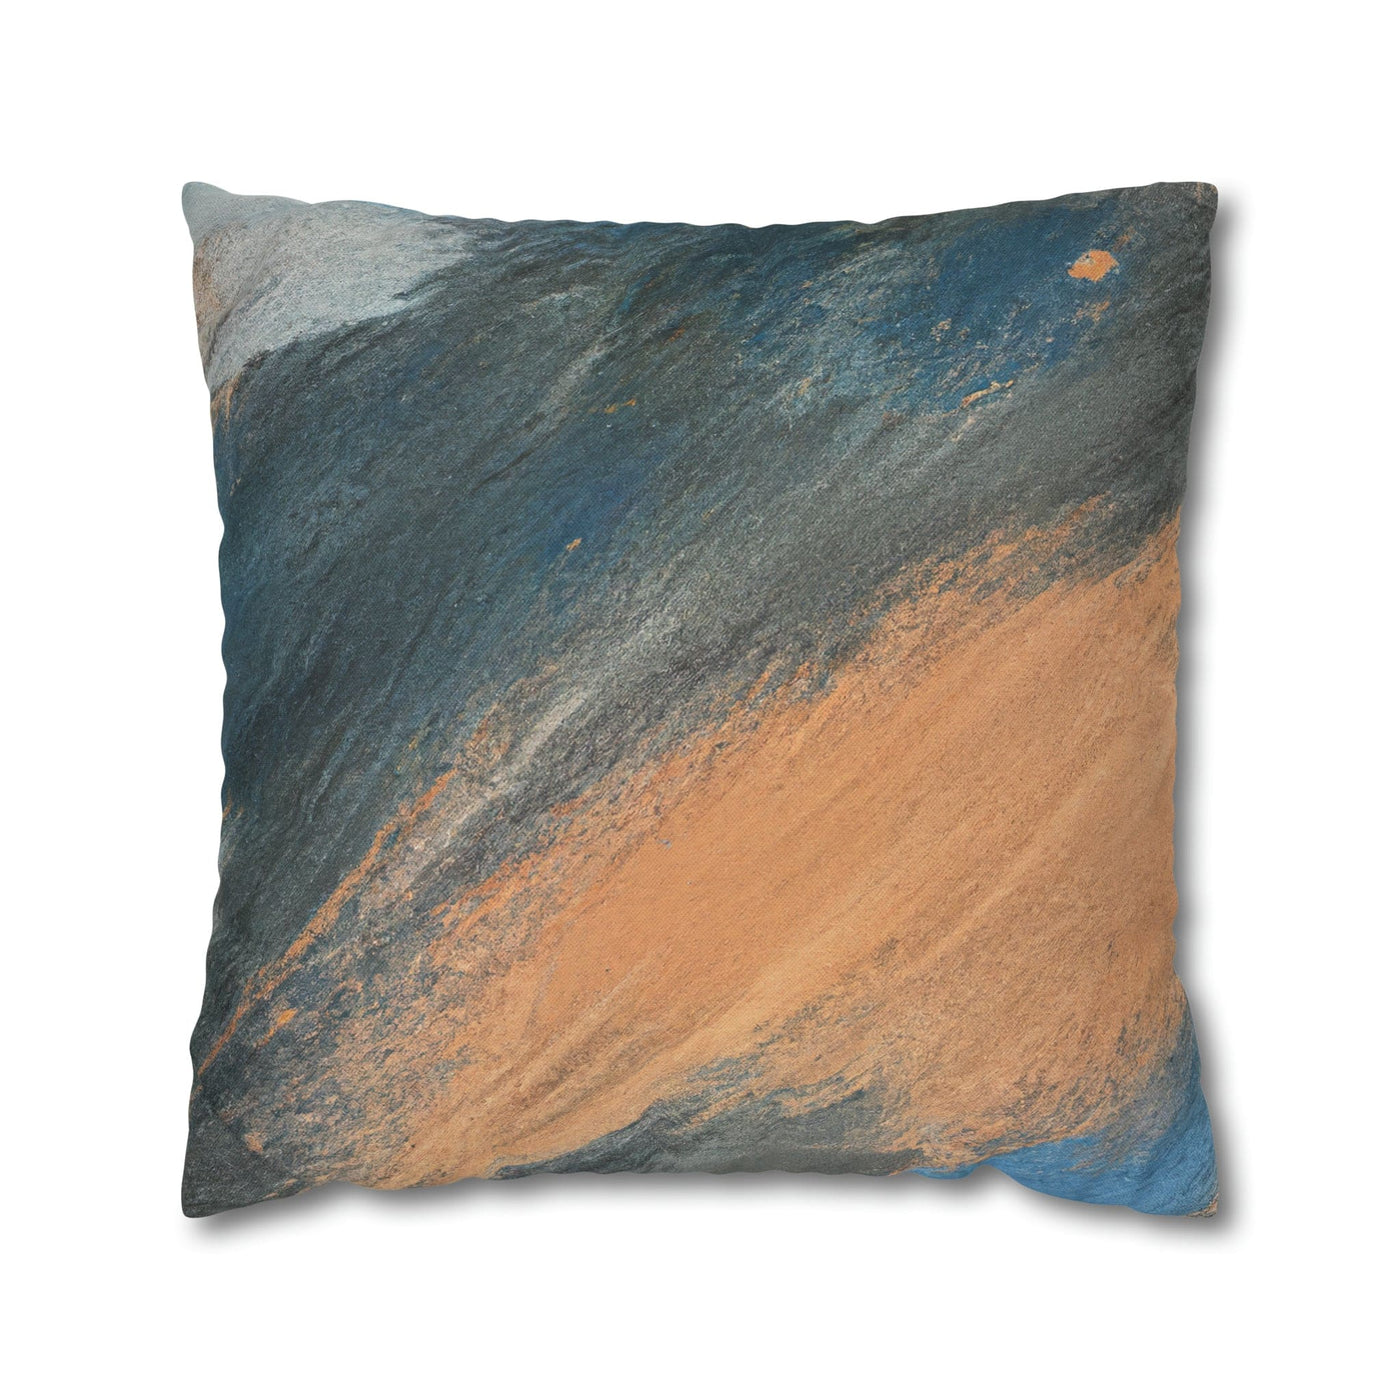 Decorative Throw Pillow Covers With Zipper - Set Of 2 Abstract Blue Orange Grey